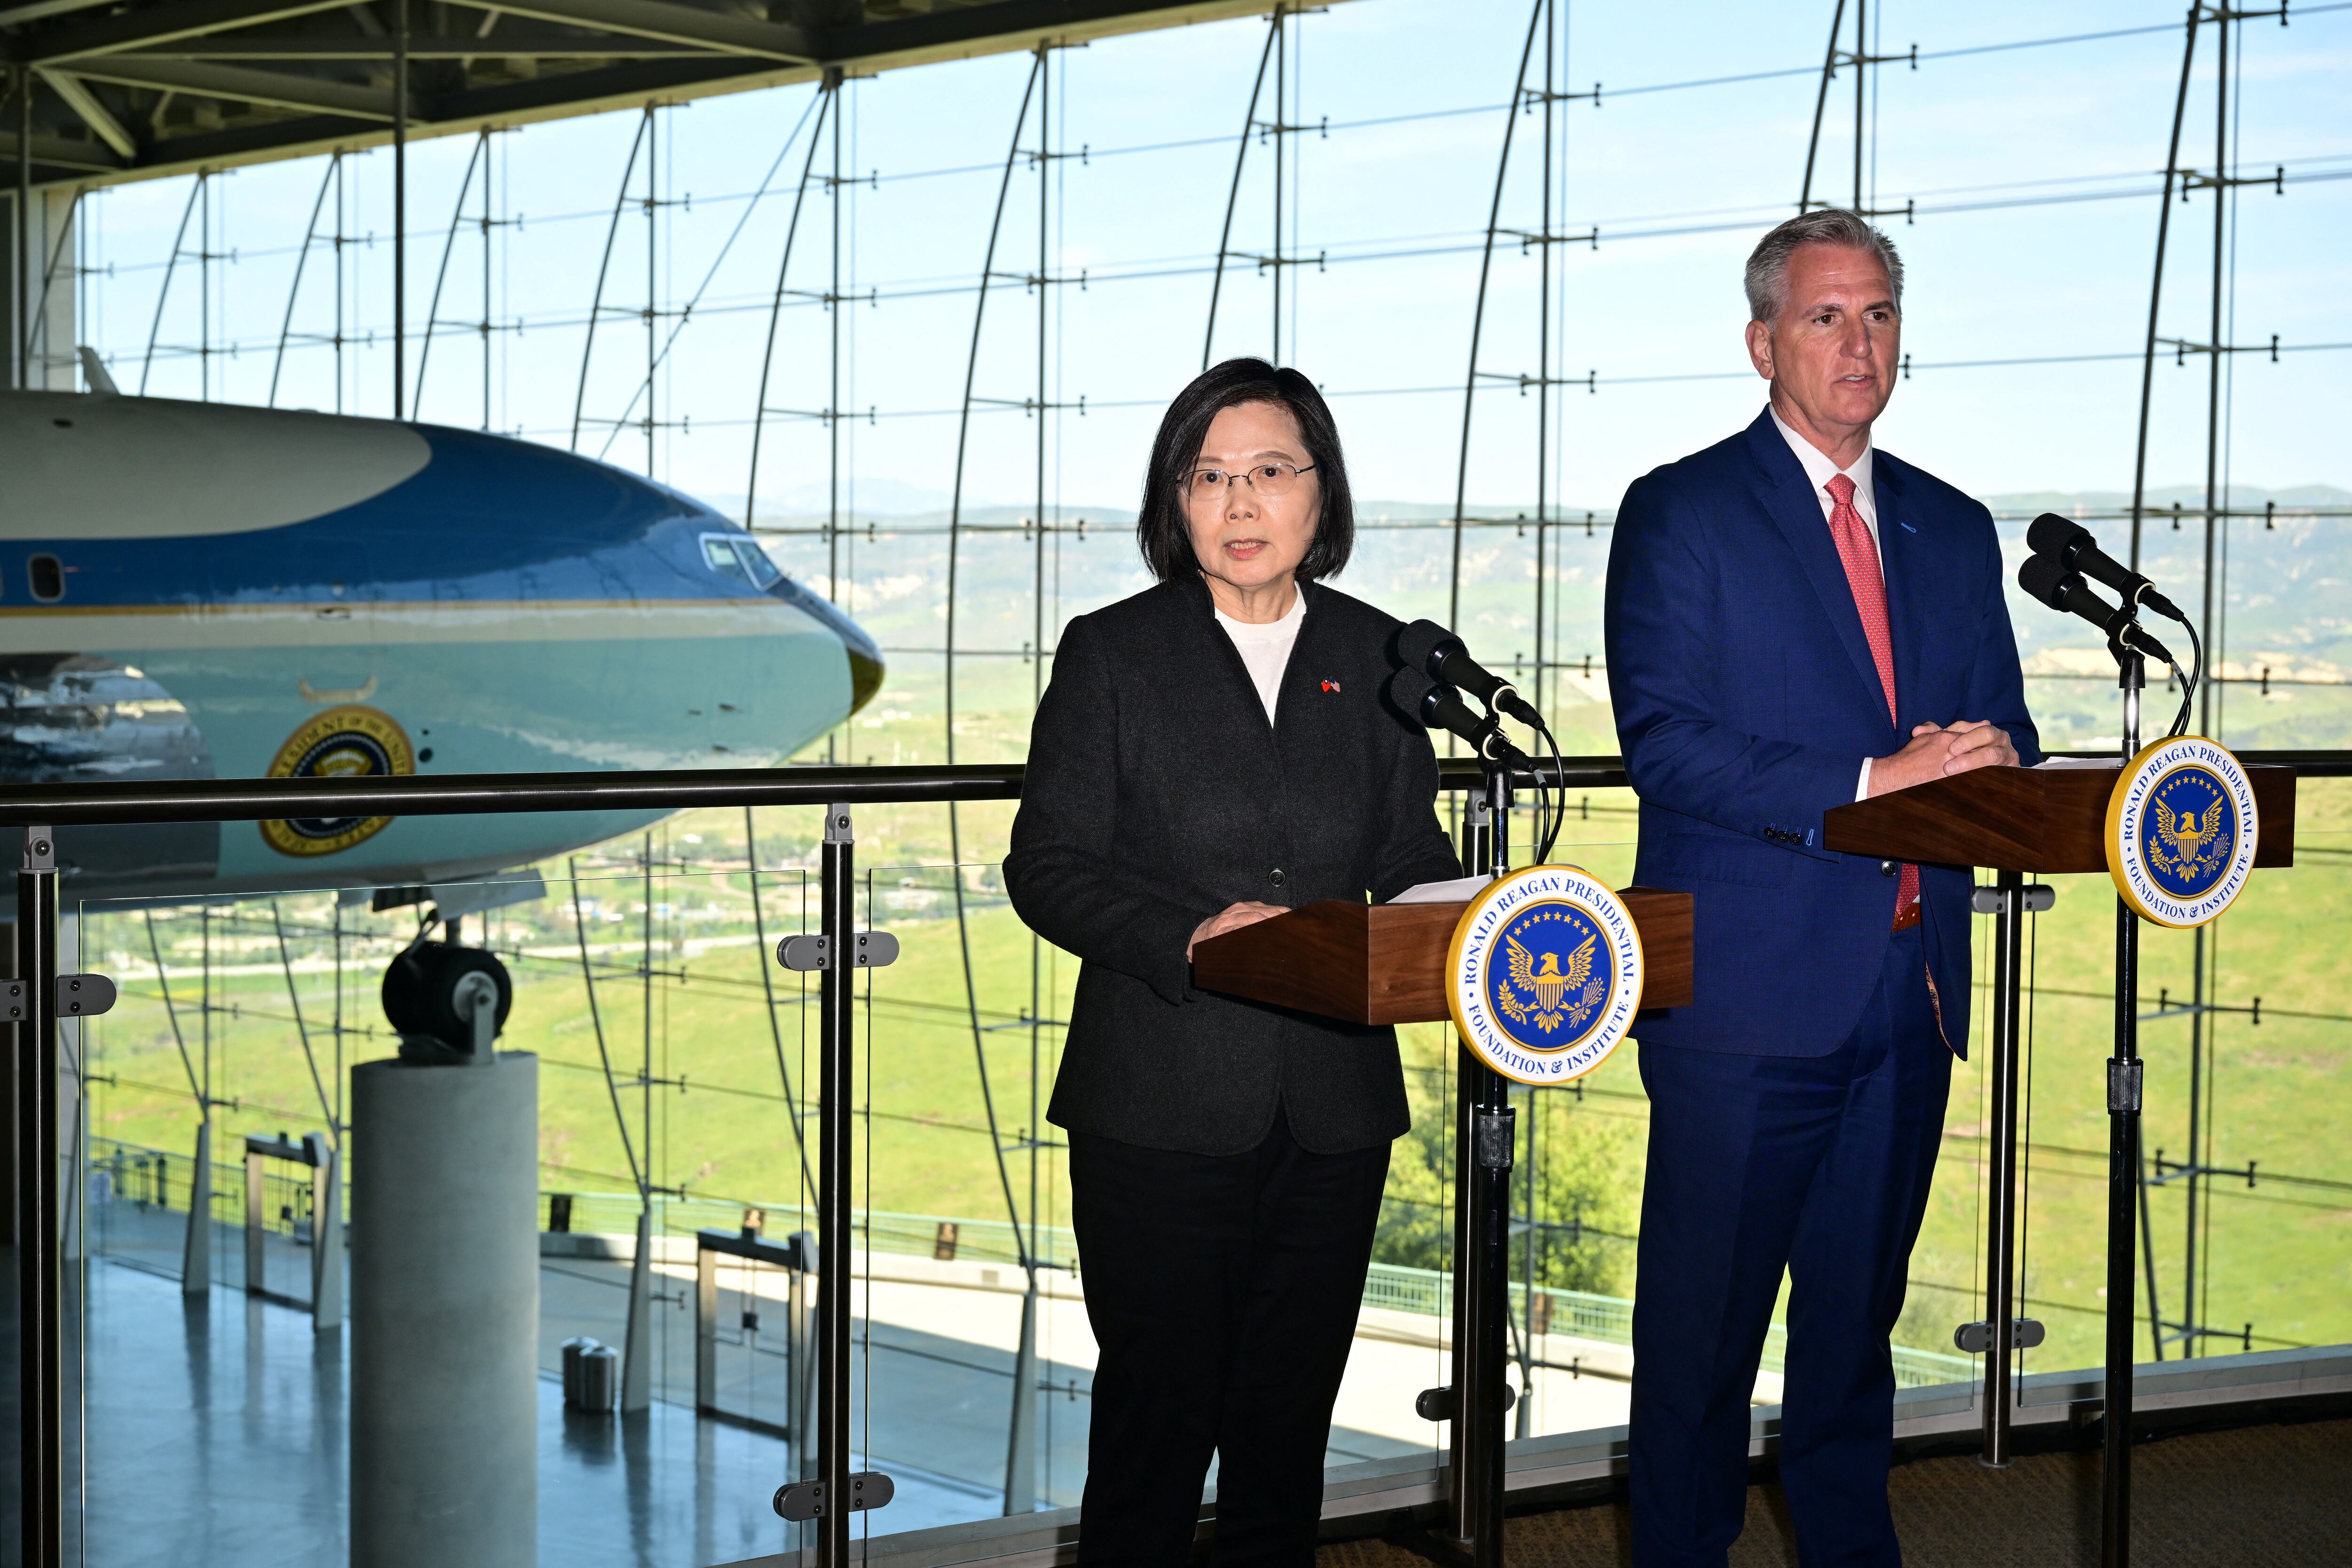 US House Speaker Kevin McCarthy (right) and Taiwan President Tsai Ing-wen speak to the press after a meeting in Simi Valley, California on April 5, 2023 (Photo by Frederic J. Brown / AFP).